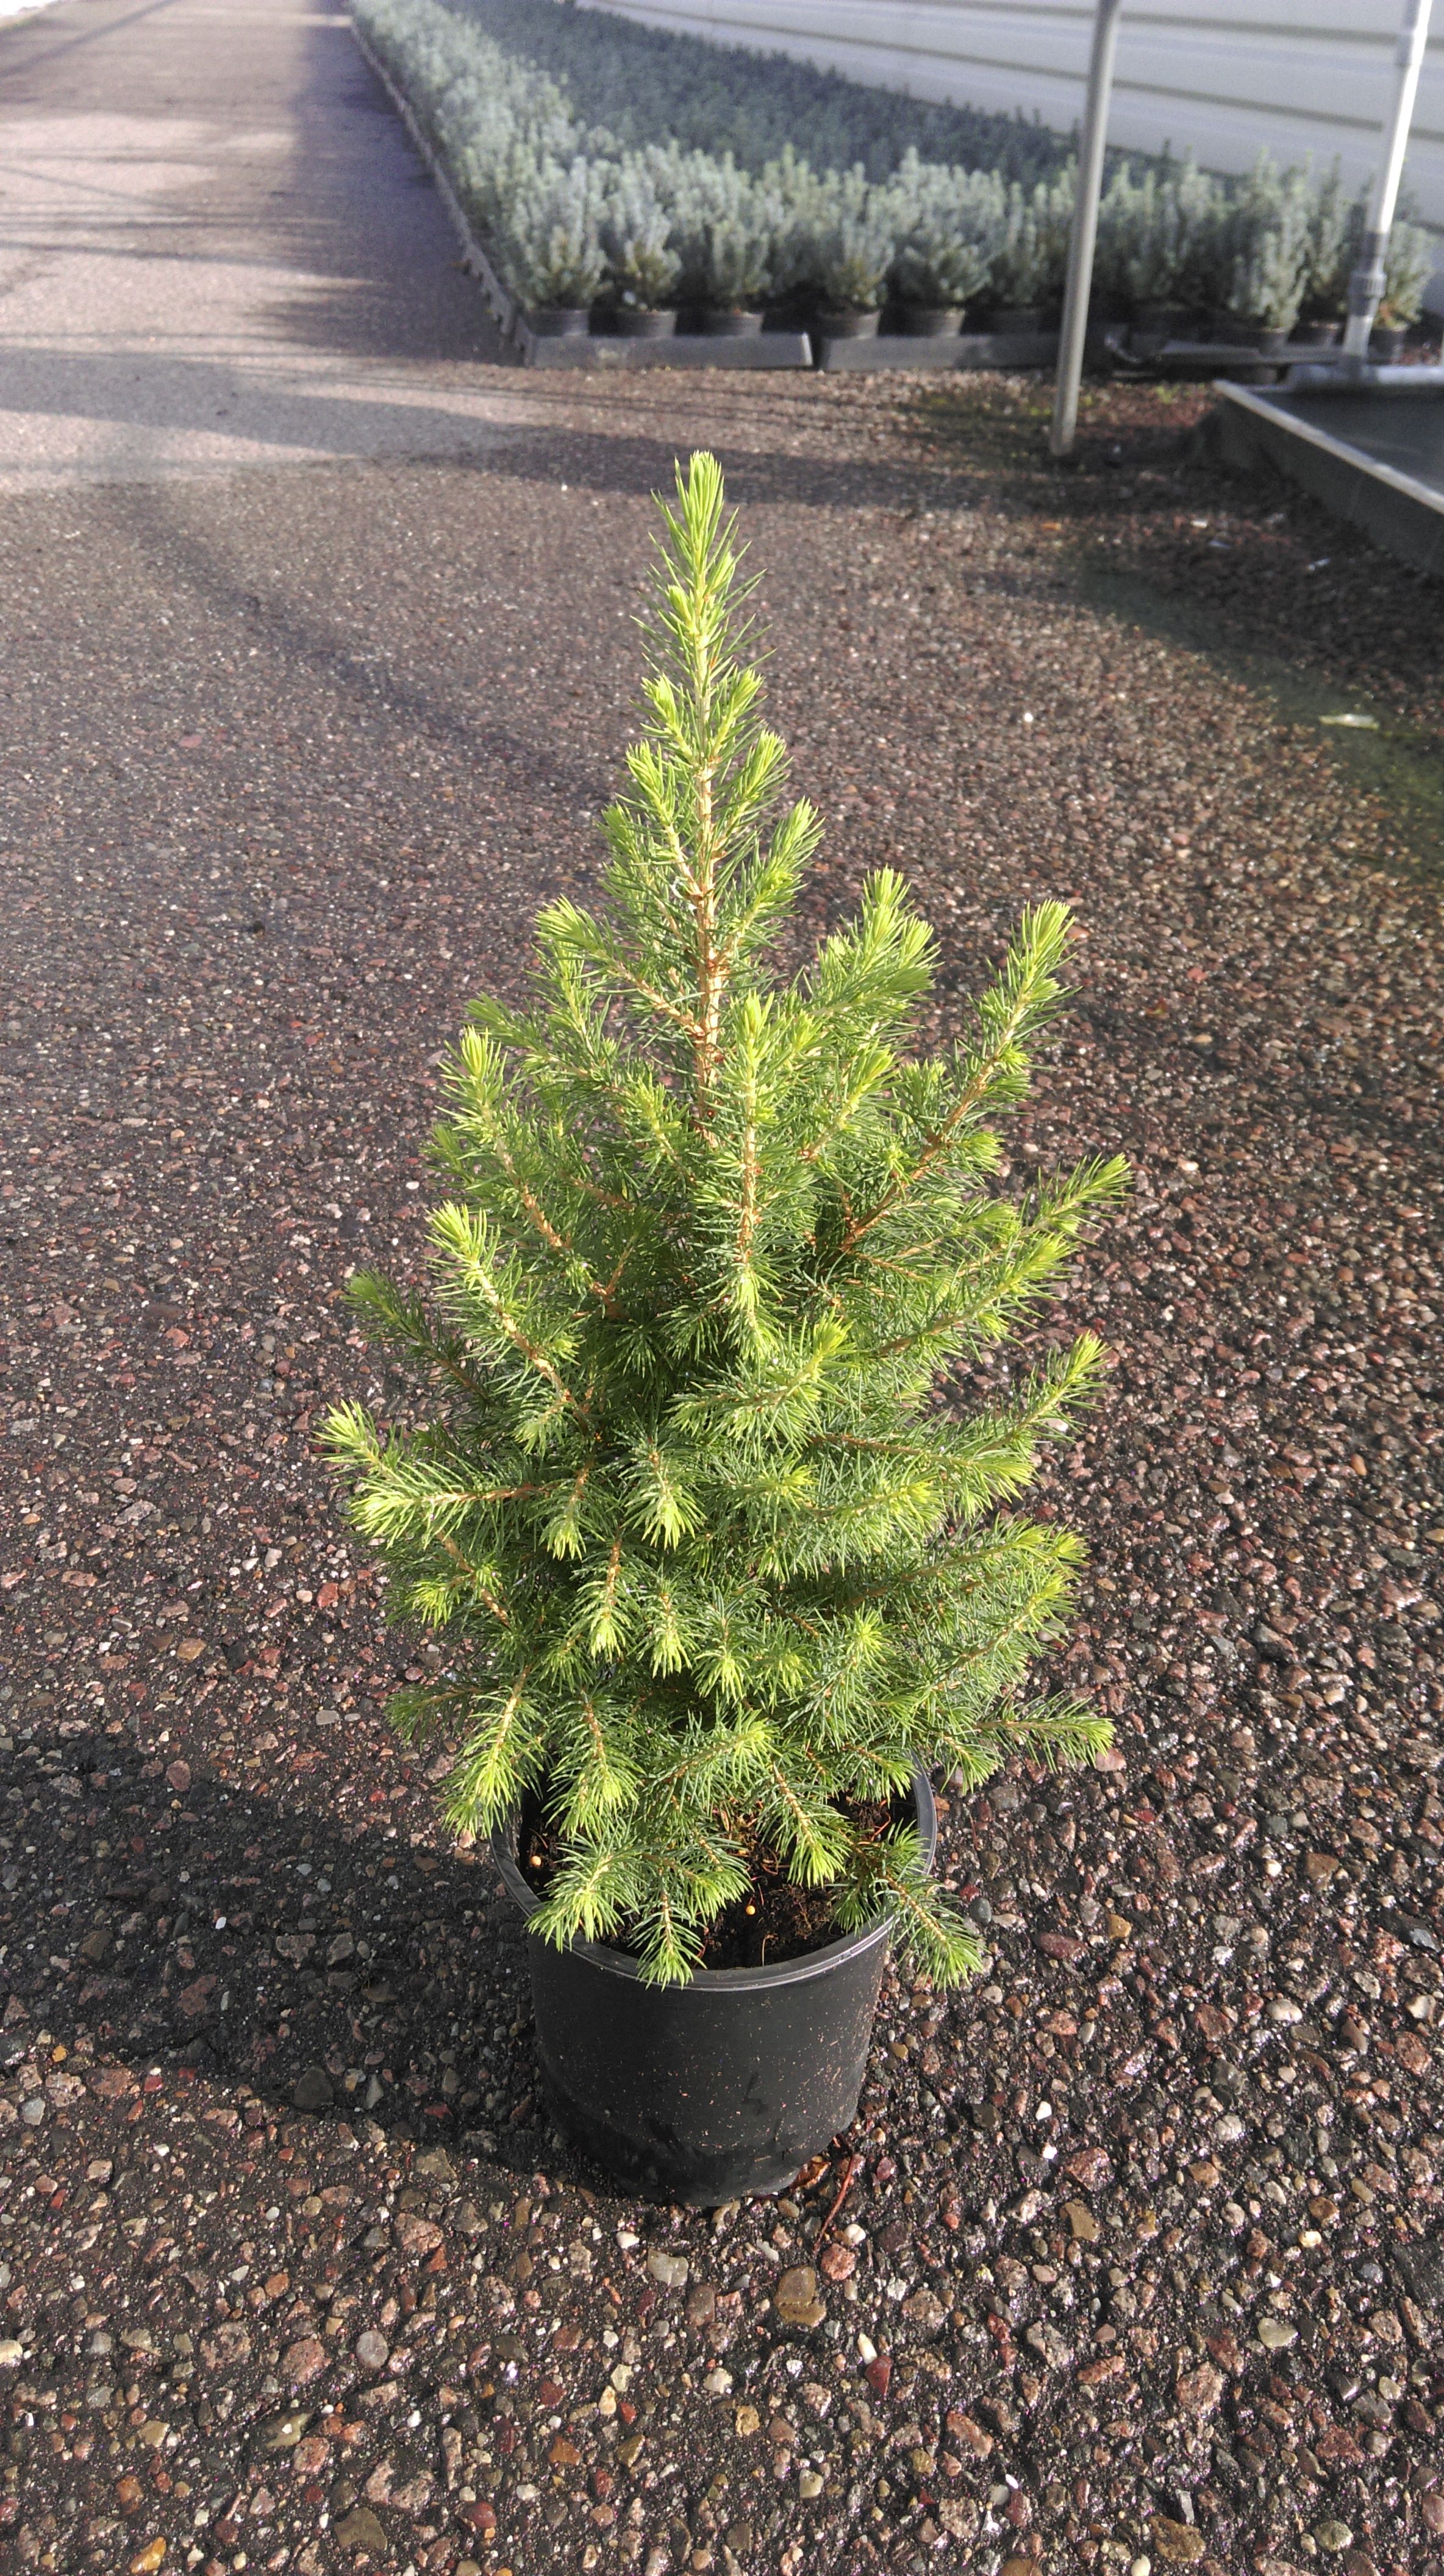 images/plants/picea/pic-spruce-it-up/pic-spruce-it-up-0002.jpg